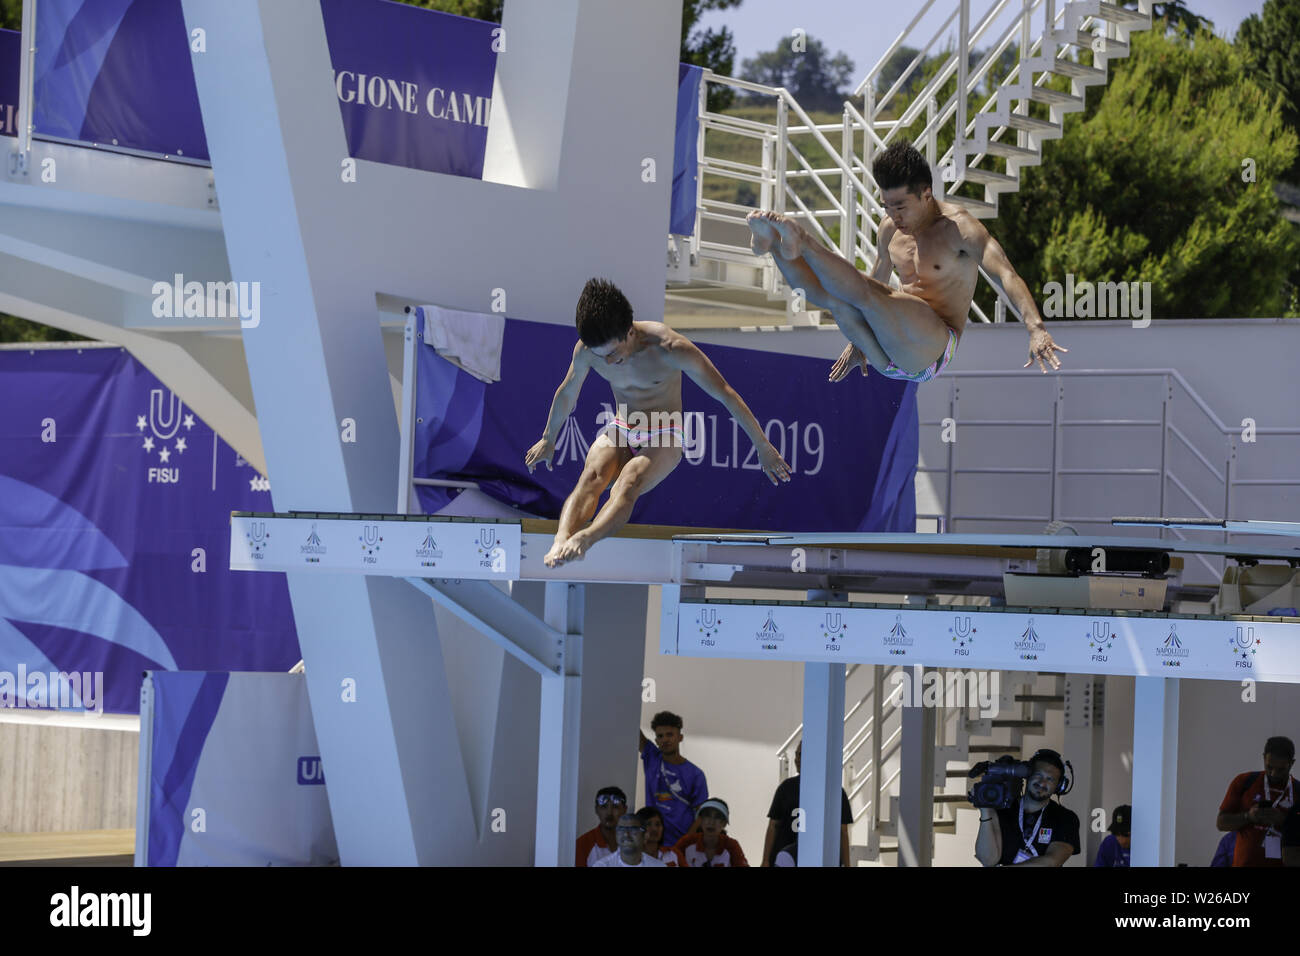 Naples, Italy. 6th July, 2019. 06/07/2019 Naples, at the overseas exhibition pool, the synchronism diving competitions from the men's 3-meter springboard of the 2019 Universiade Napoli are held. Credit: Fabio Sasso/ZUMA Wire/Alamy Live News Stock Photo